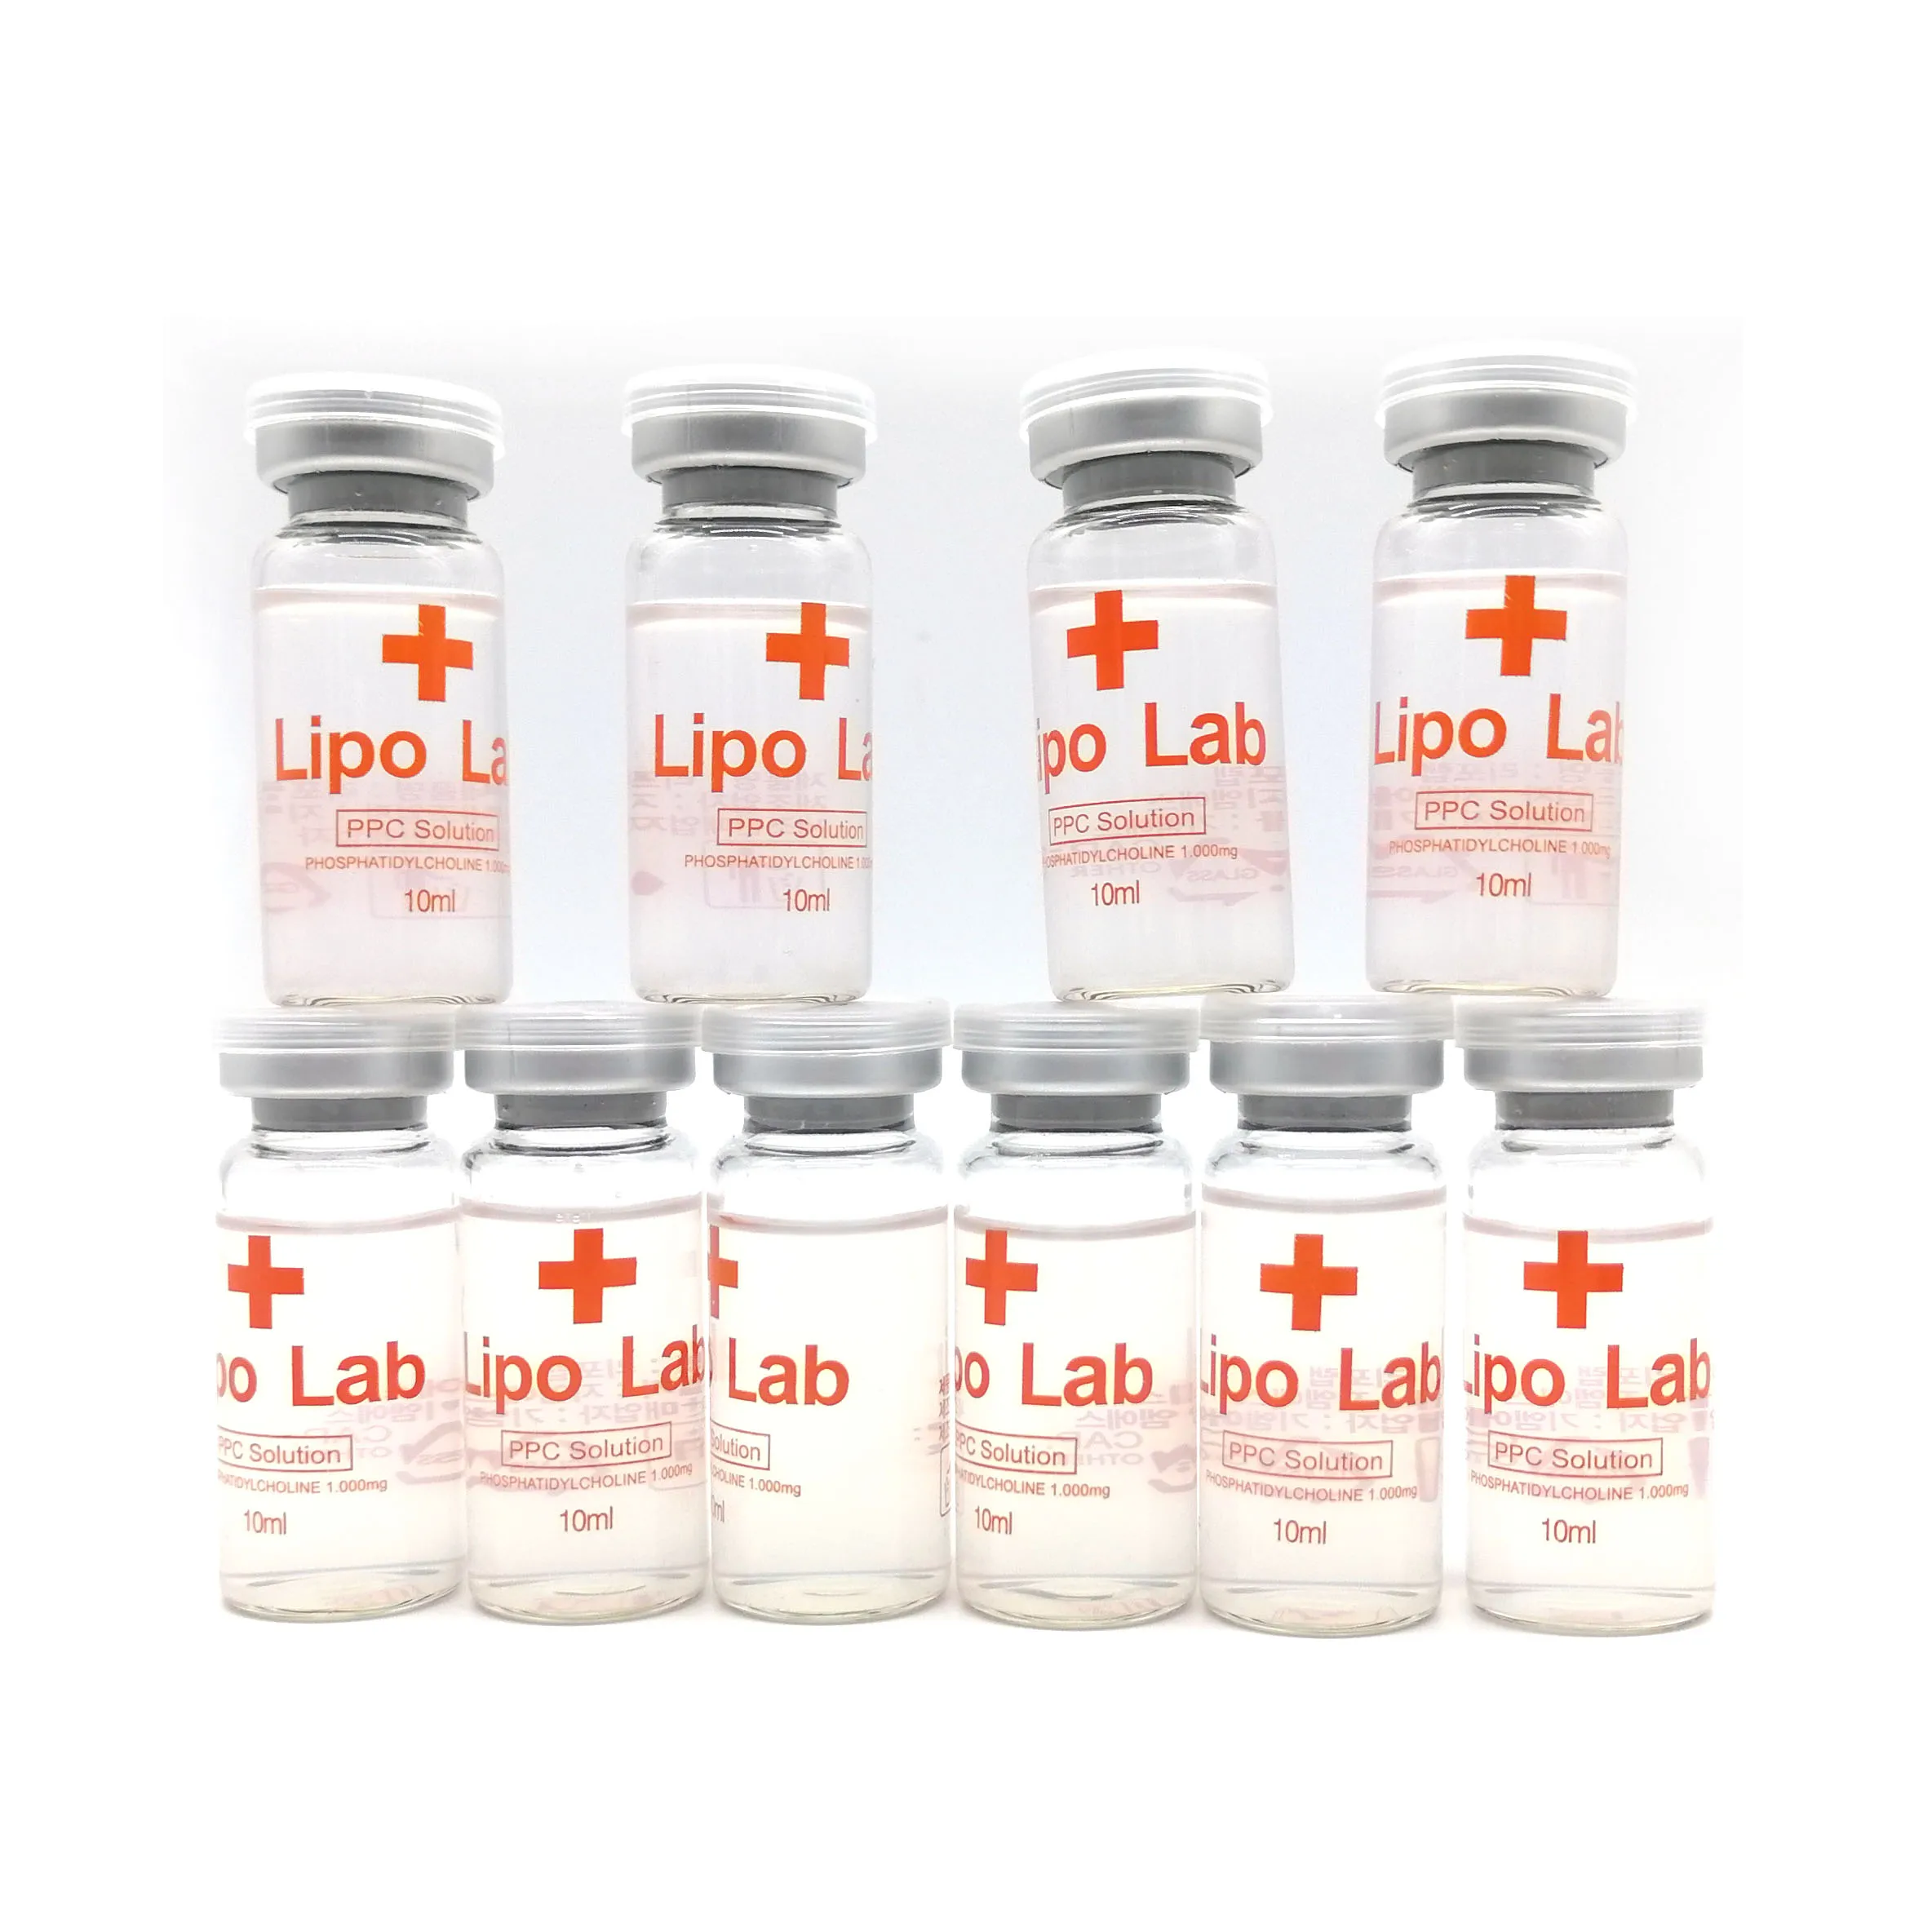 

lipo lab ppc slimming solution fat dissolving body fat loss injection